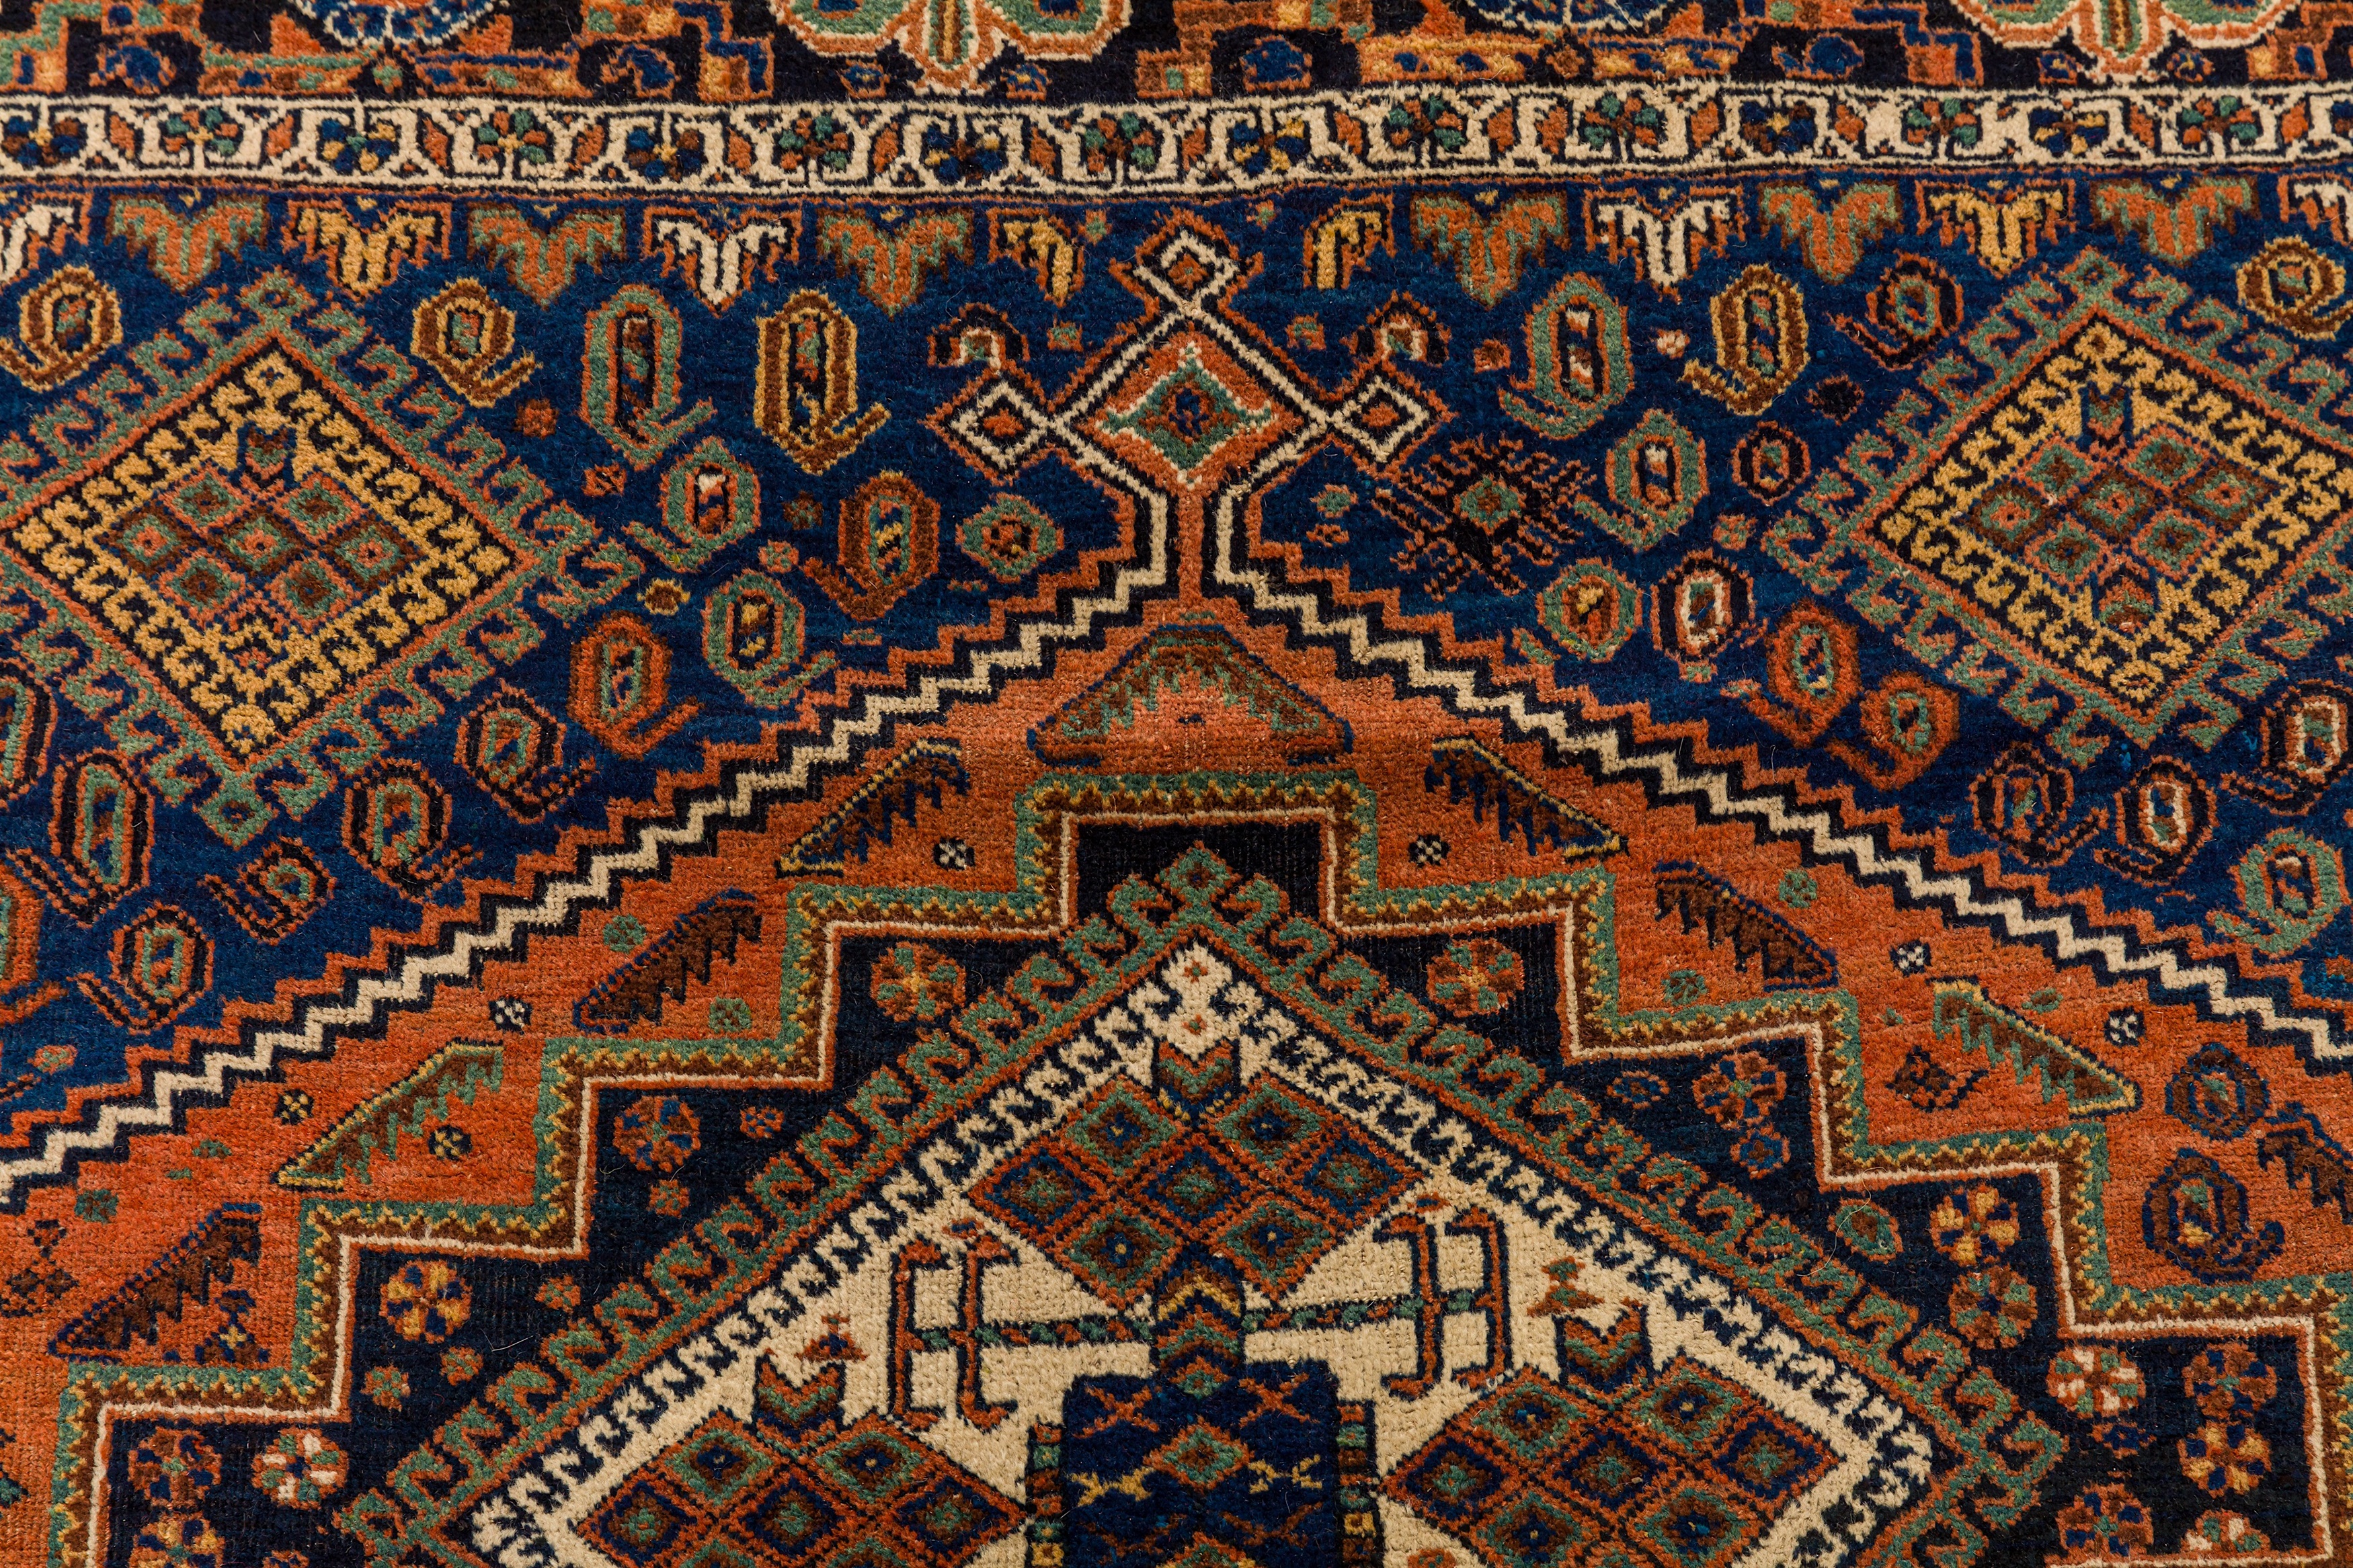 A FINE AFSHAR RUG, SOUTH-WEST PERSIA - Image 3 of 7